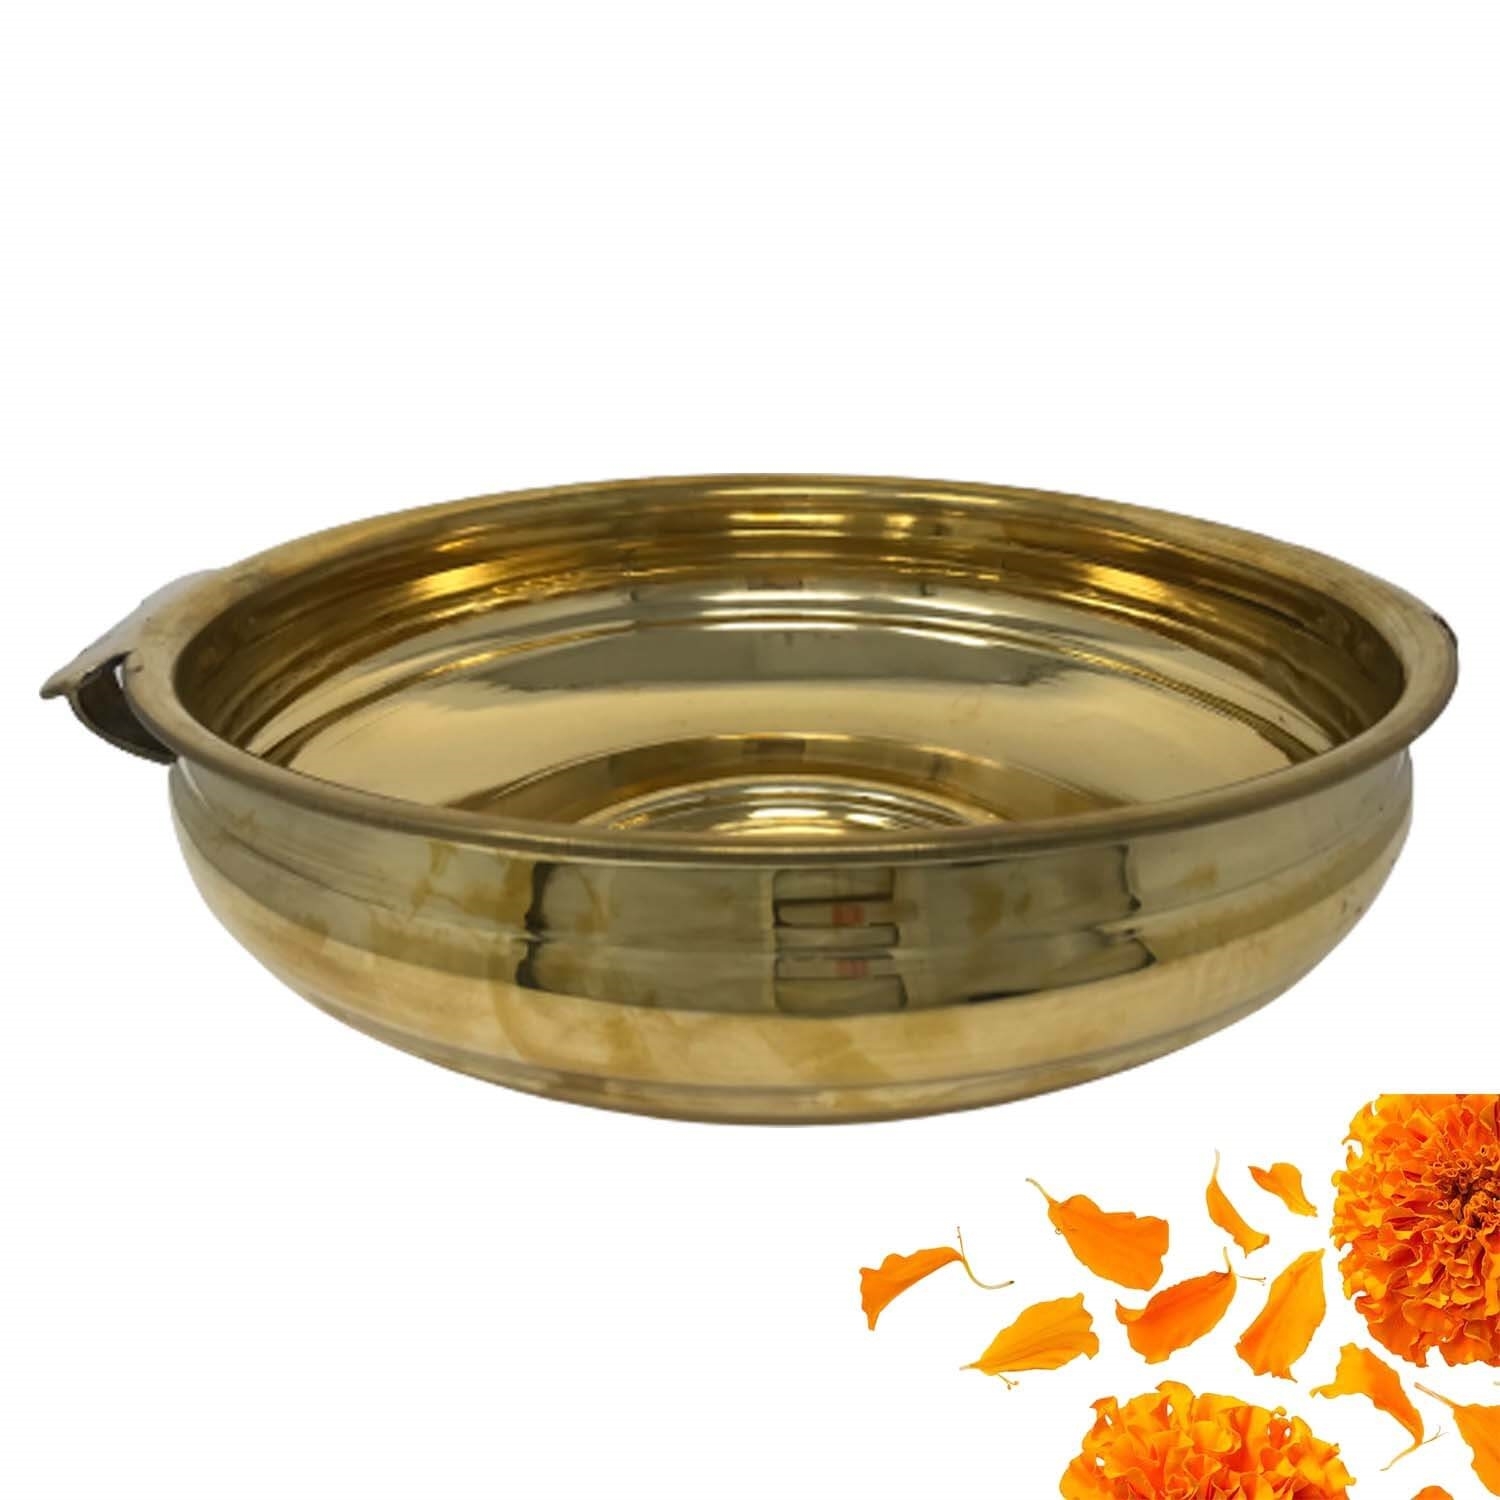 Handcrafted Traditional Pure Brass (Shiney Finish) Urli Bowl/Pot 18 Inches Dia -made available by Celebrate Festival Inc